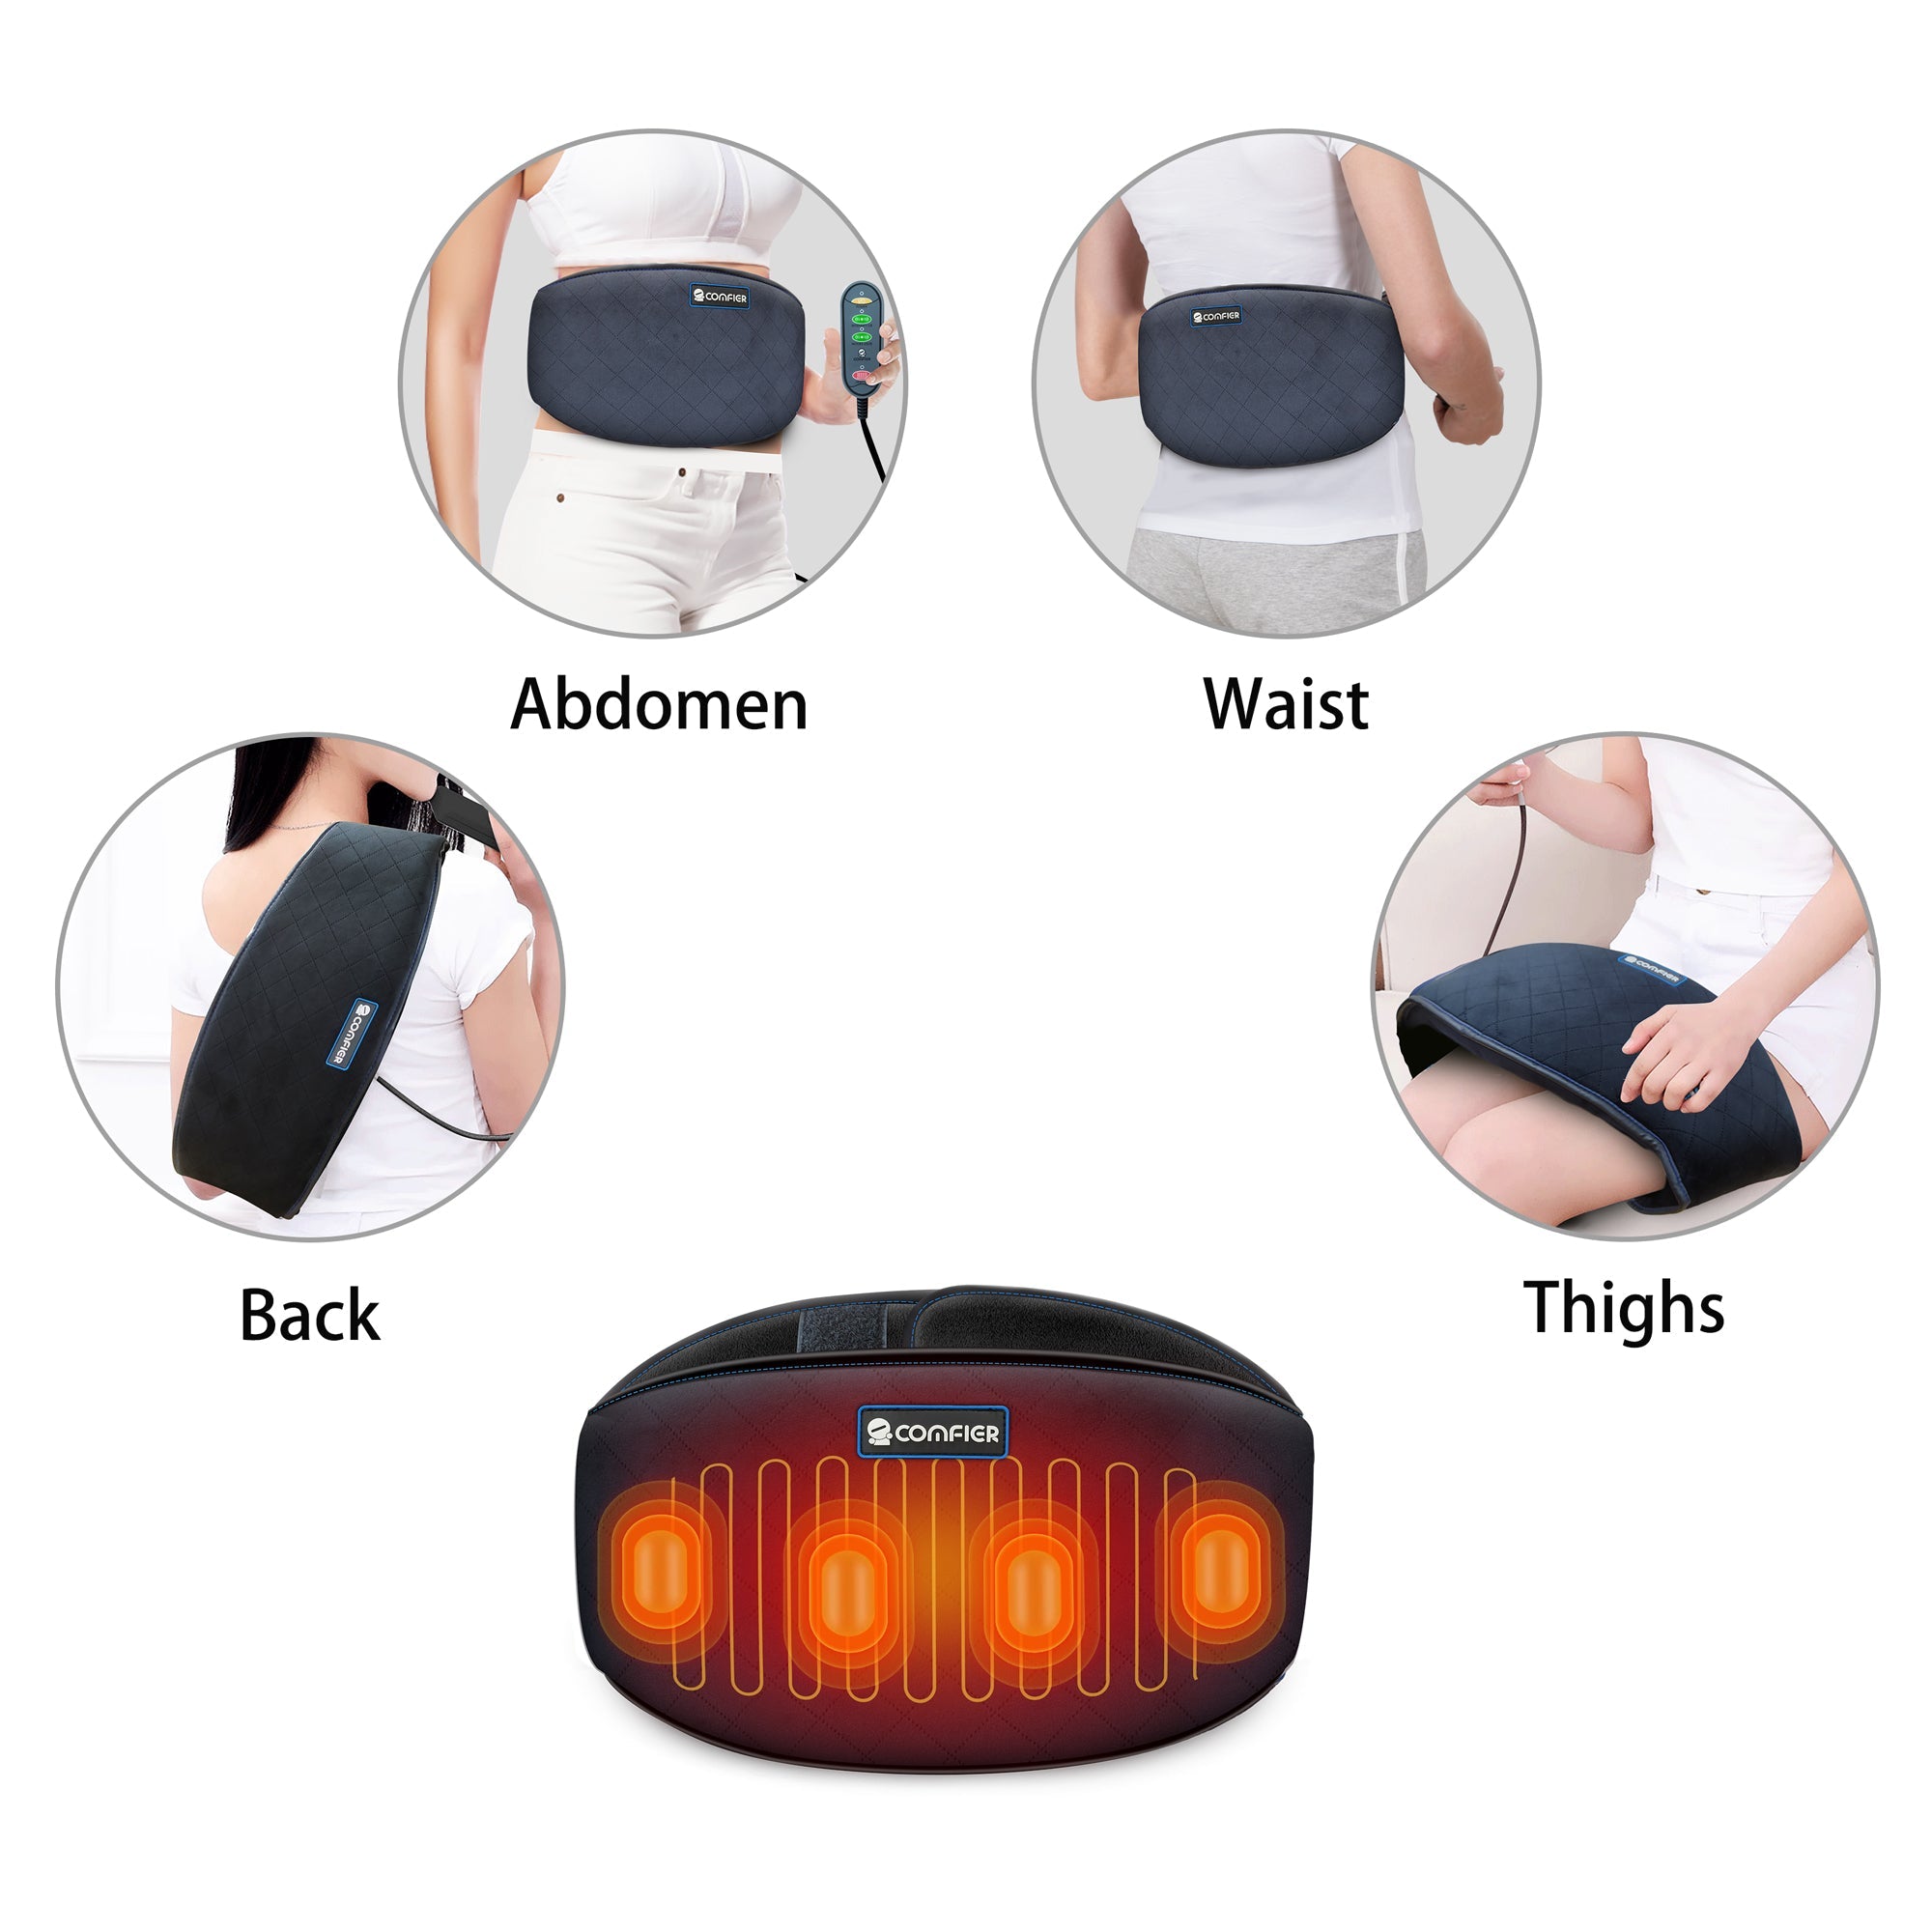 Certified Refurbished - Comfier Heating Pad for Back Pain - Heat Belly Wrap Belt with Vibration Massage for Abdominal,Cramps Arthritic Pain Relief - 6006N-USED